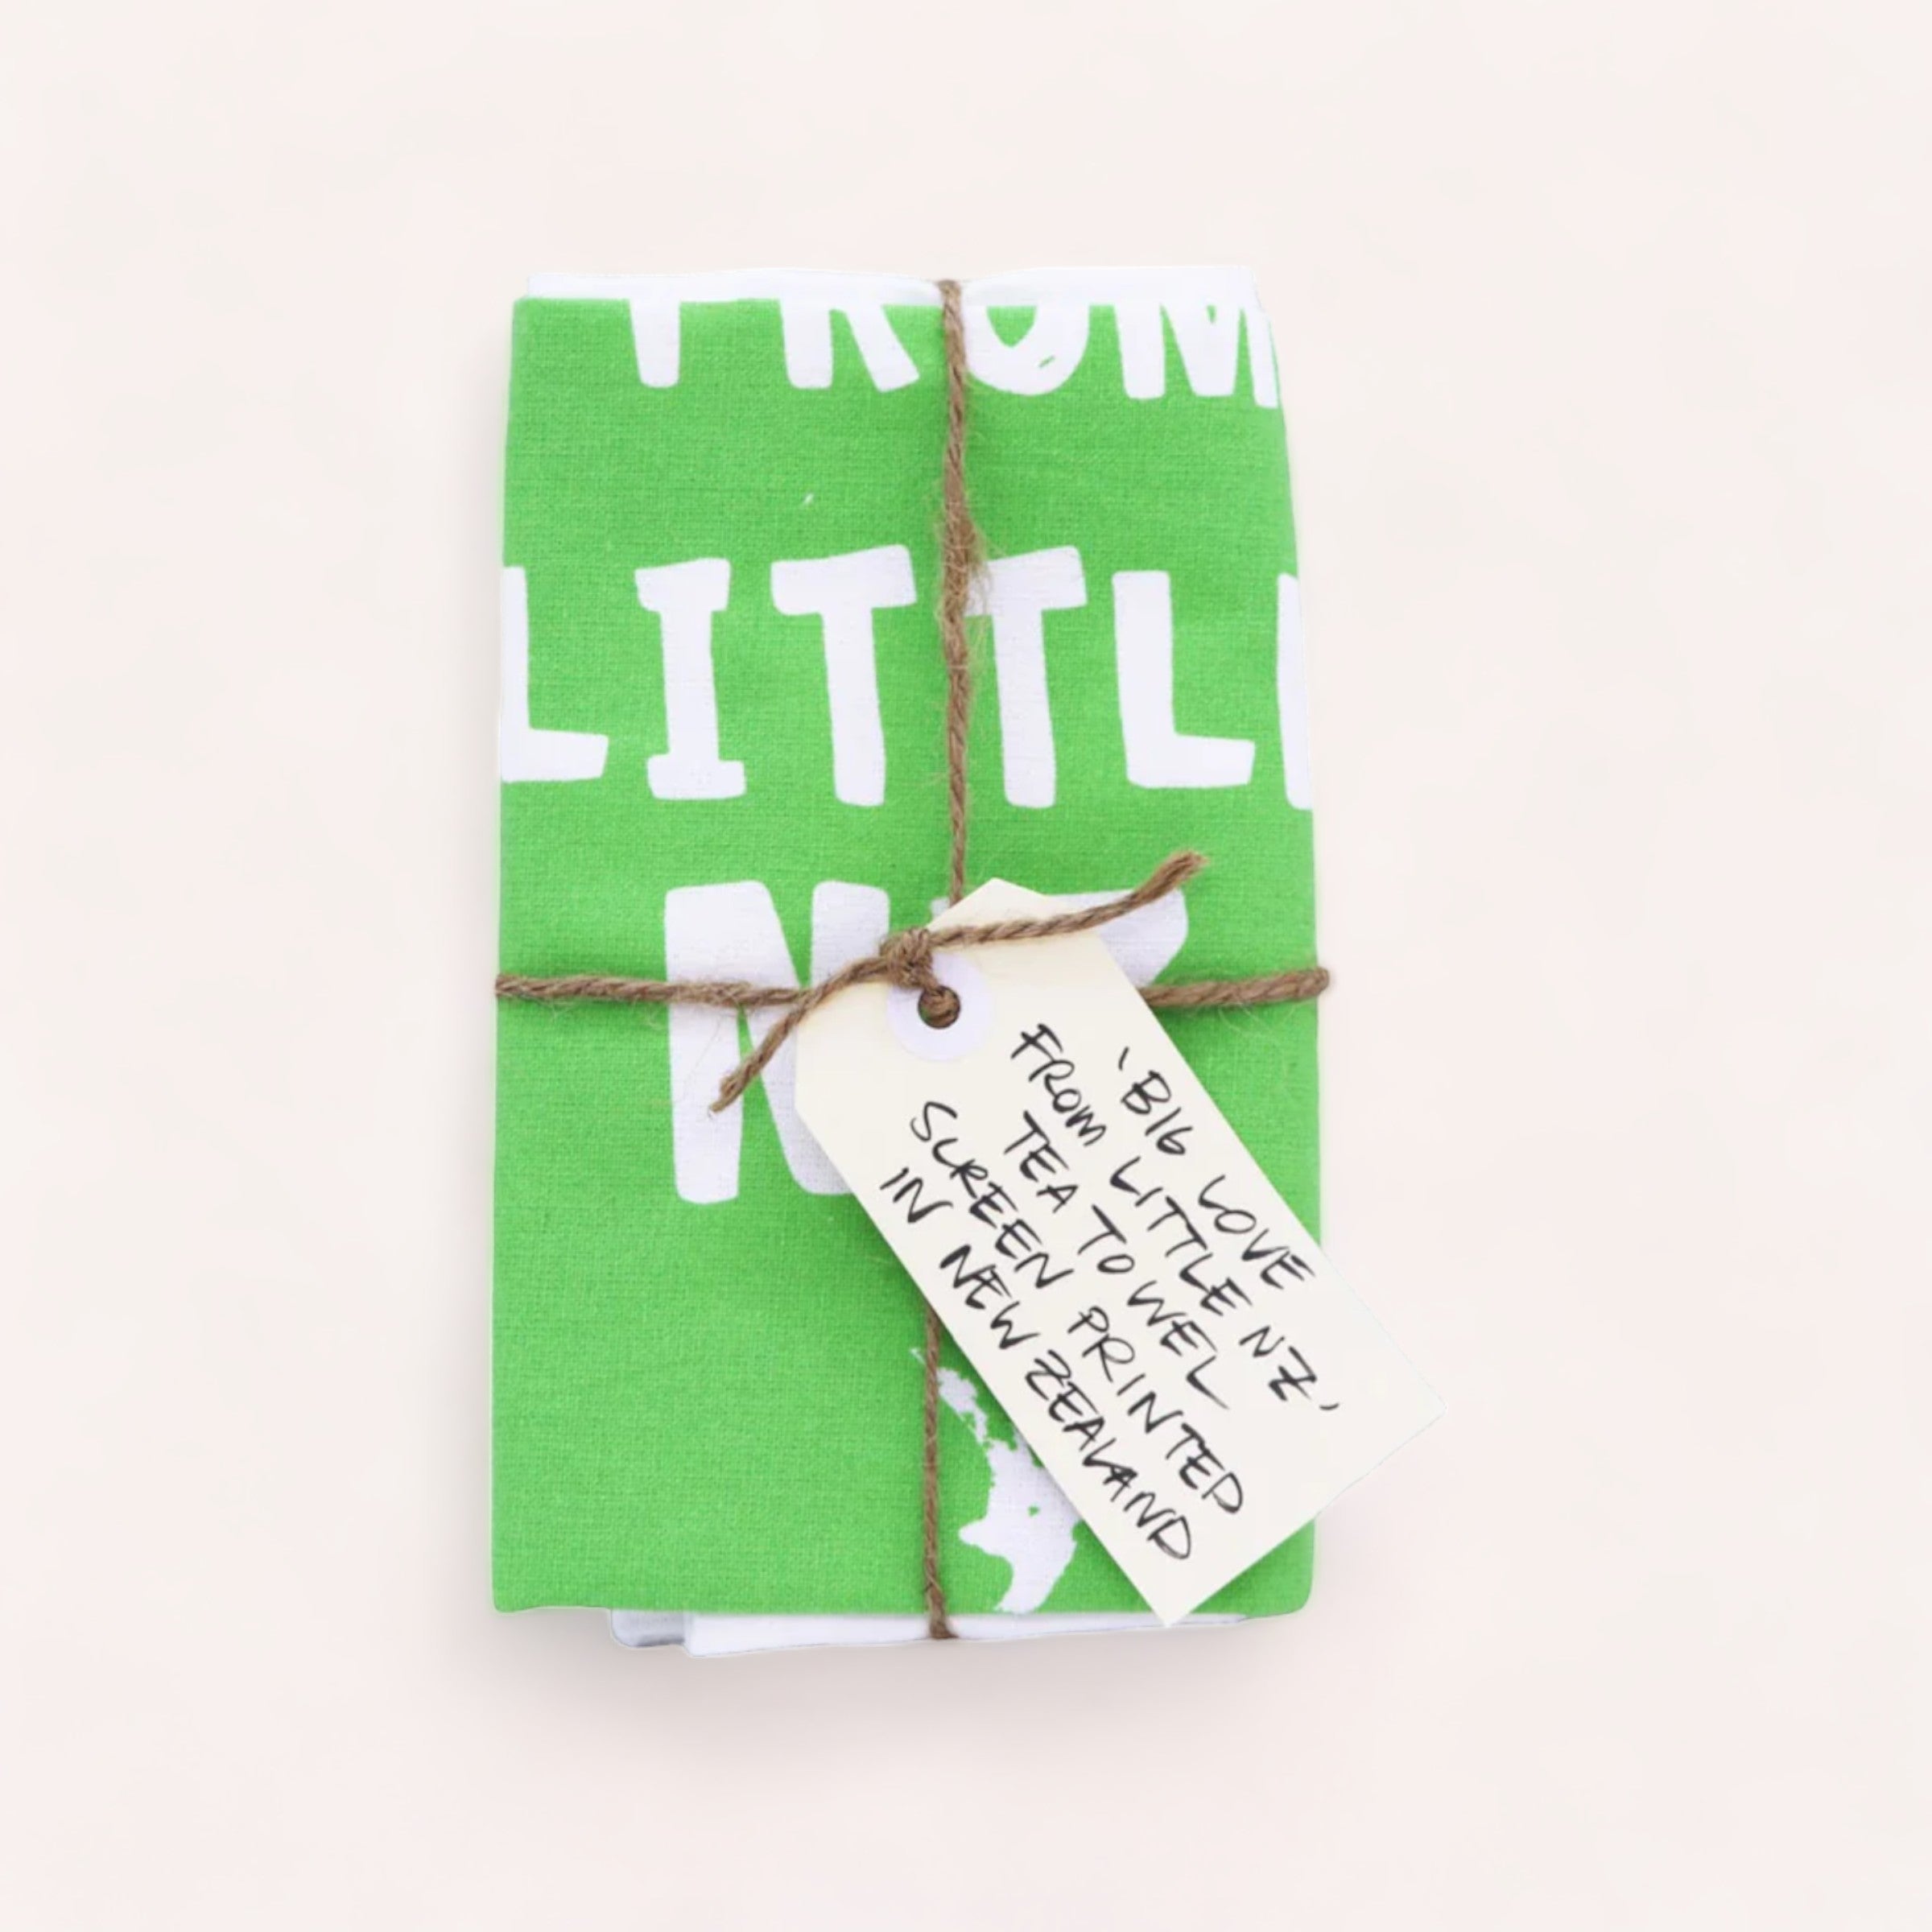 A neatly wrapped gift in green fabric with white lettering, tied with a rustic string and a handwritten gift tag, encasing a Tuesday Print Big Love from little NZ Tea Towel.